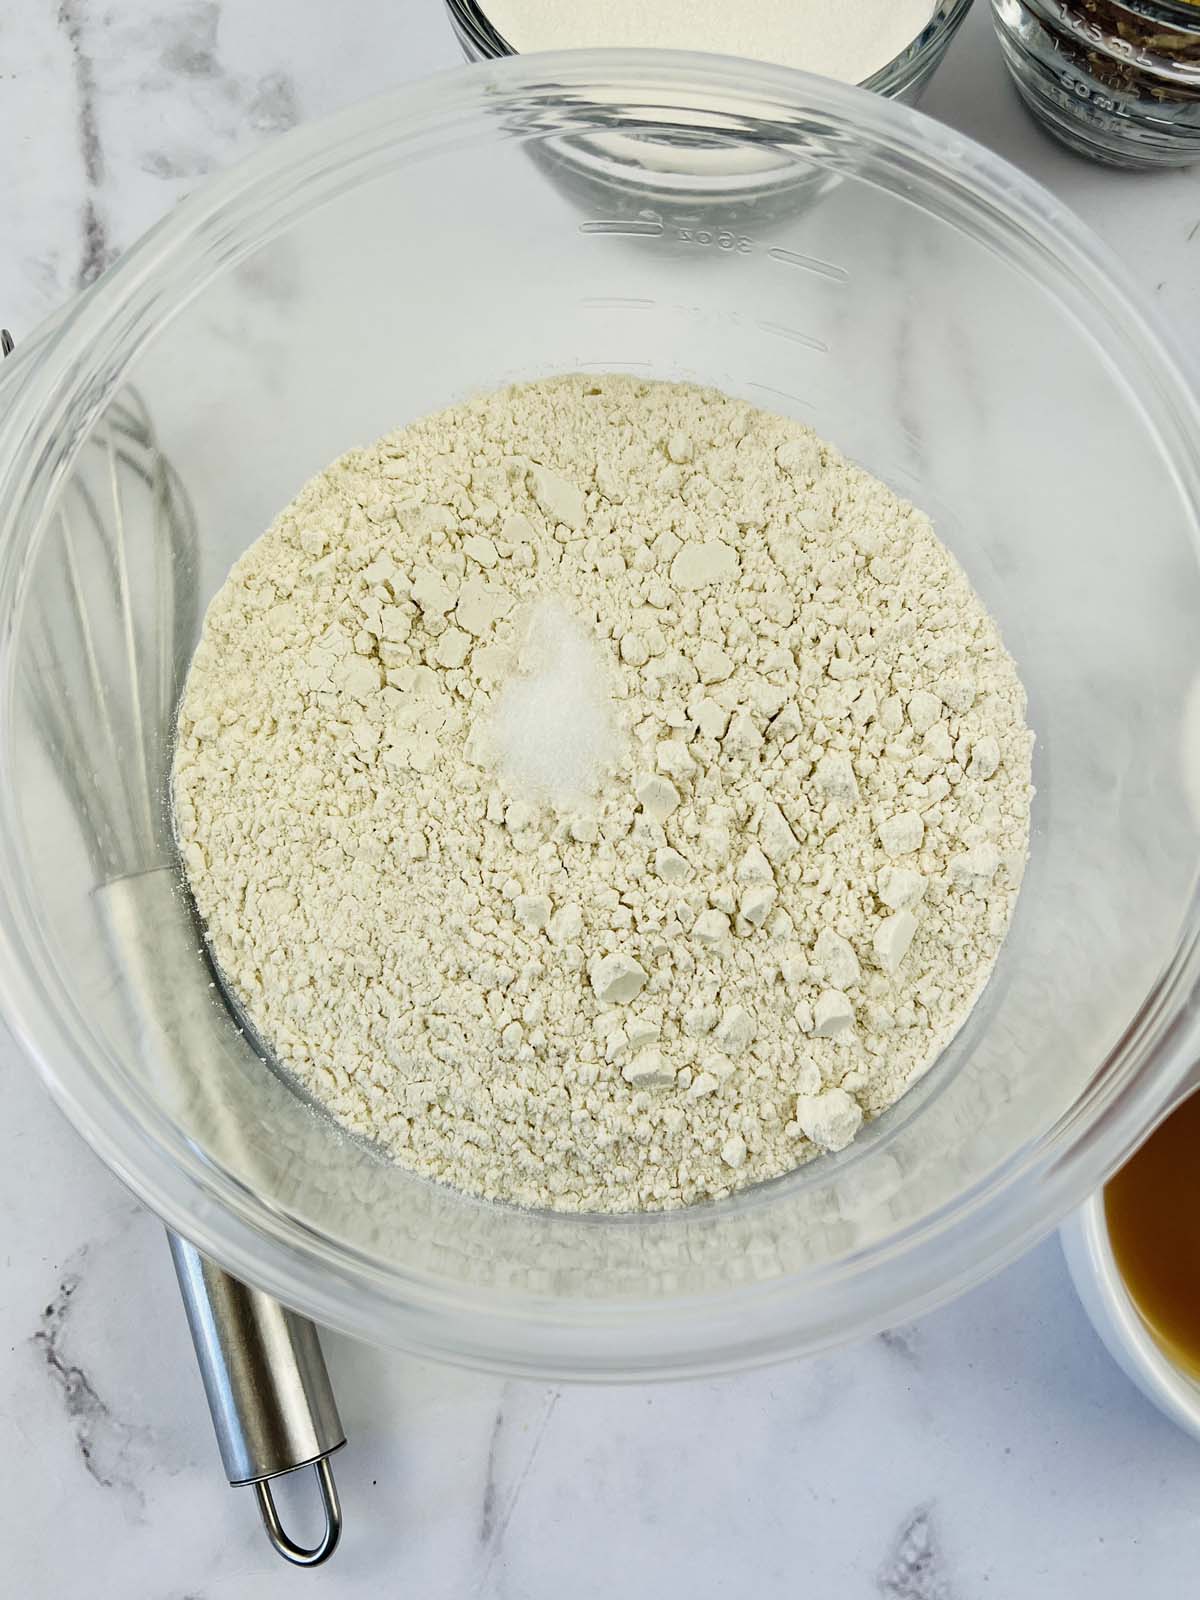 The dry dough ingredients in a mixing bowl.